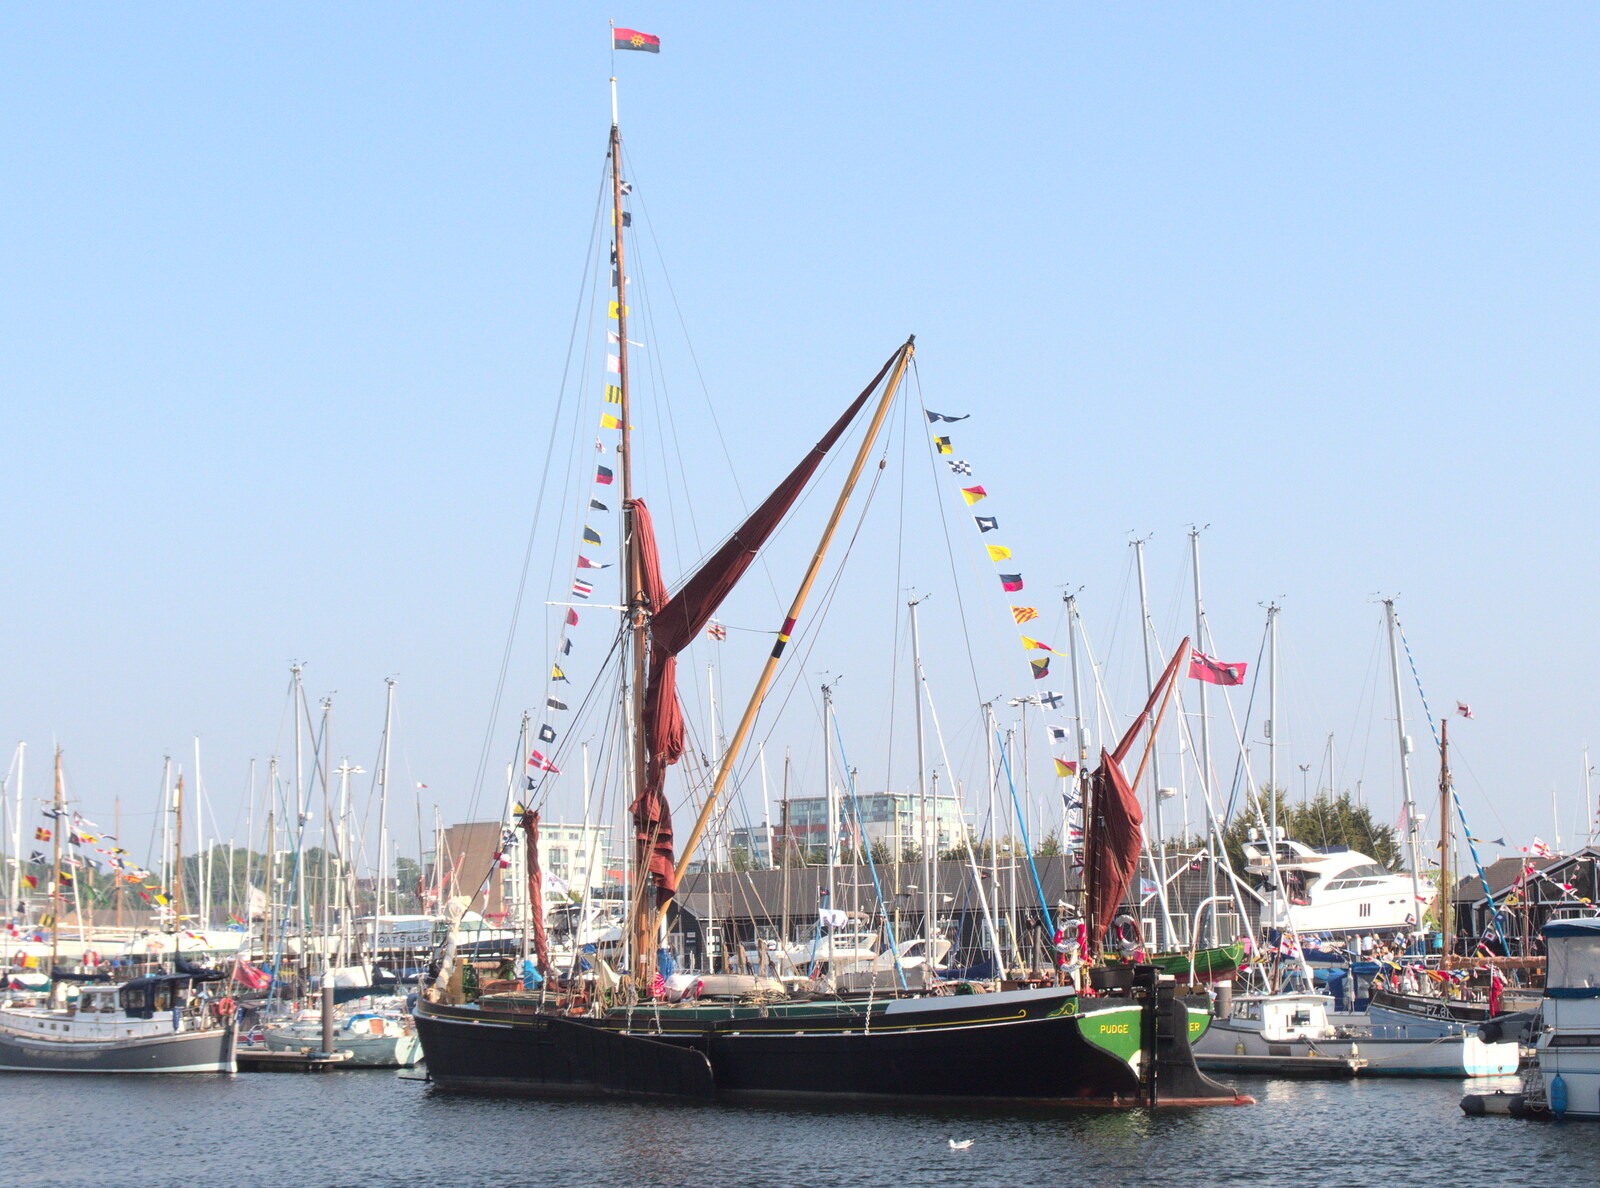 A sailing barge from An Unexpected Birthday, Ipswich, Suffolk - 26th May 2018